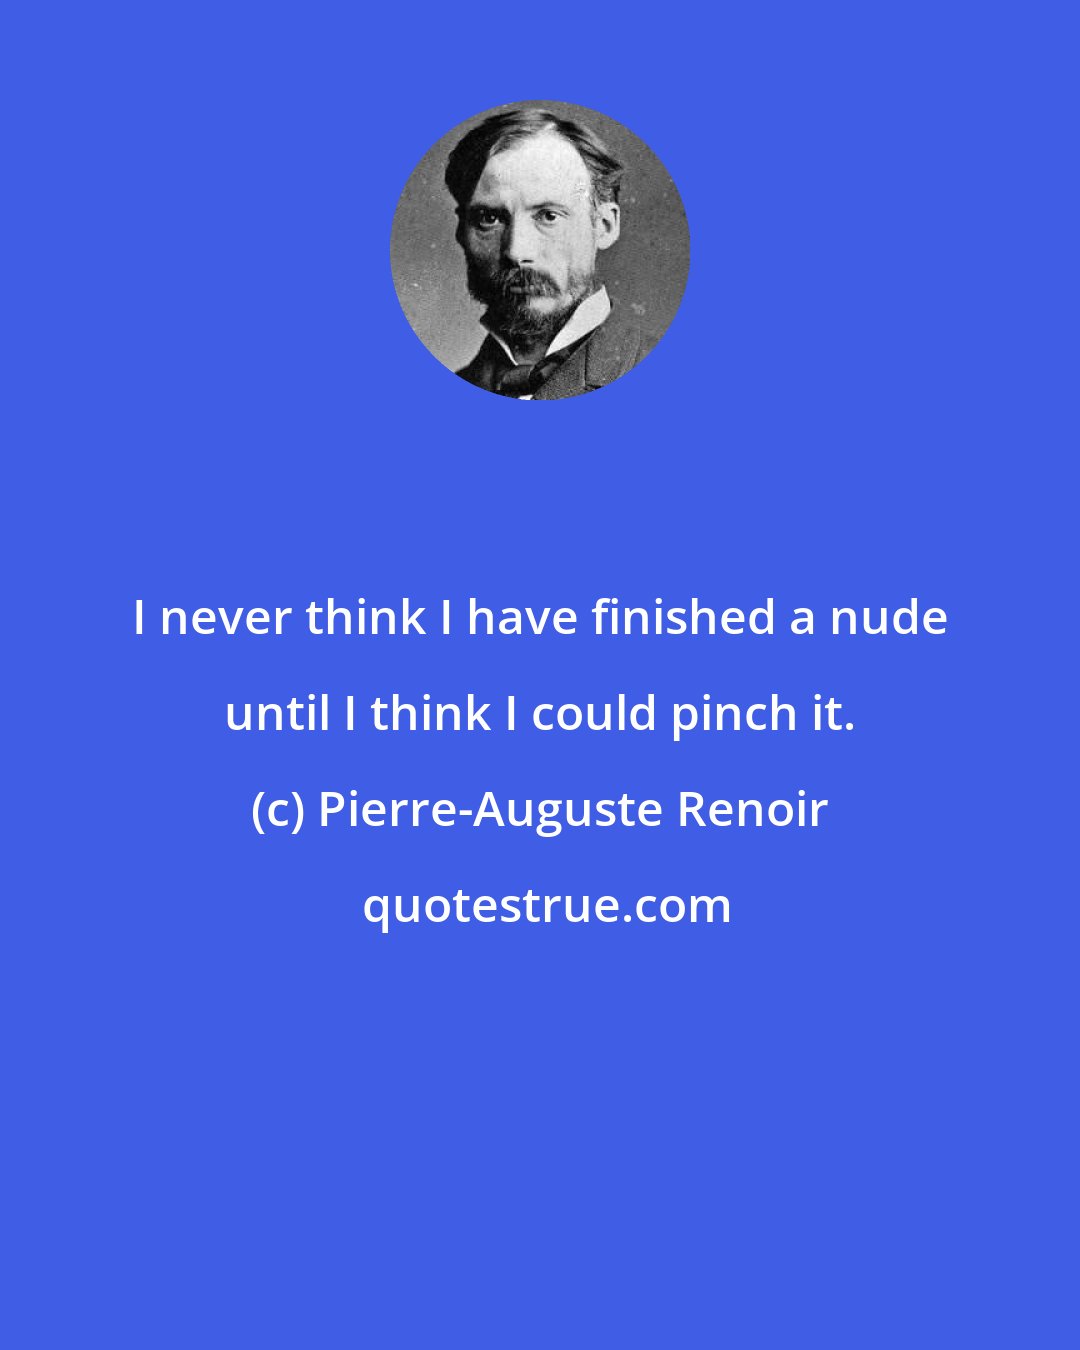 Pierre-Auguste Renoir: I never think I have finished a nude until I think I could pinch it.